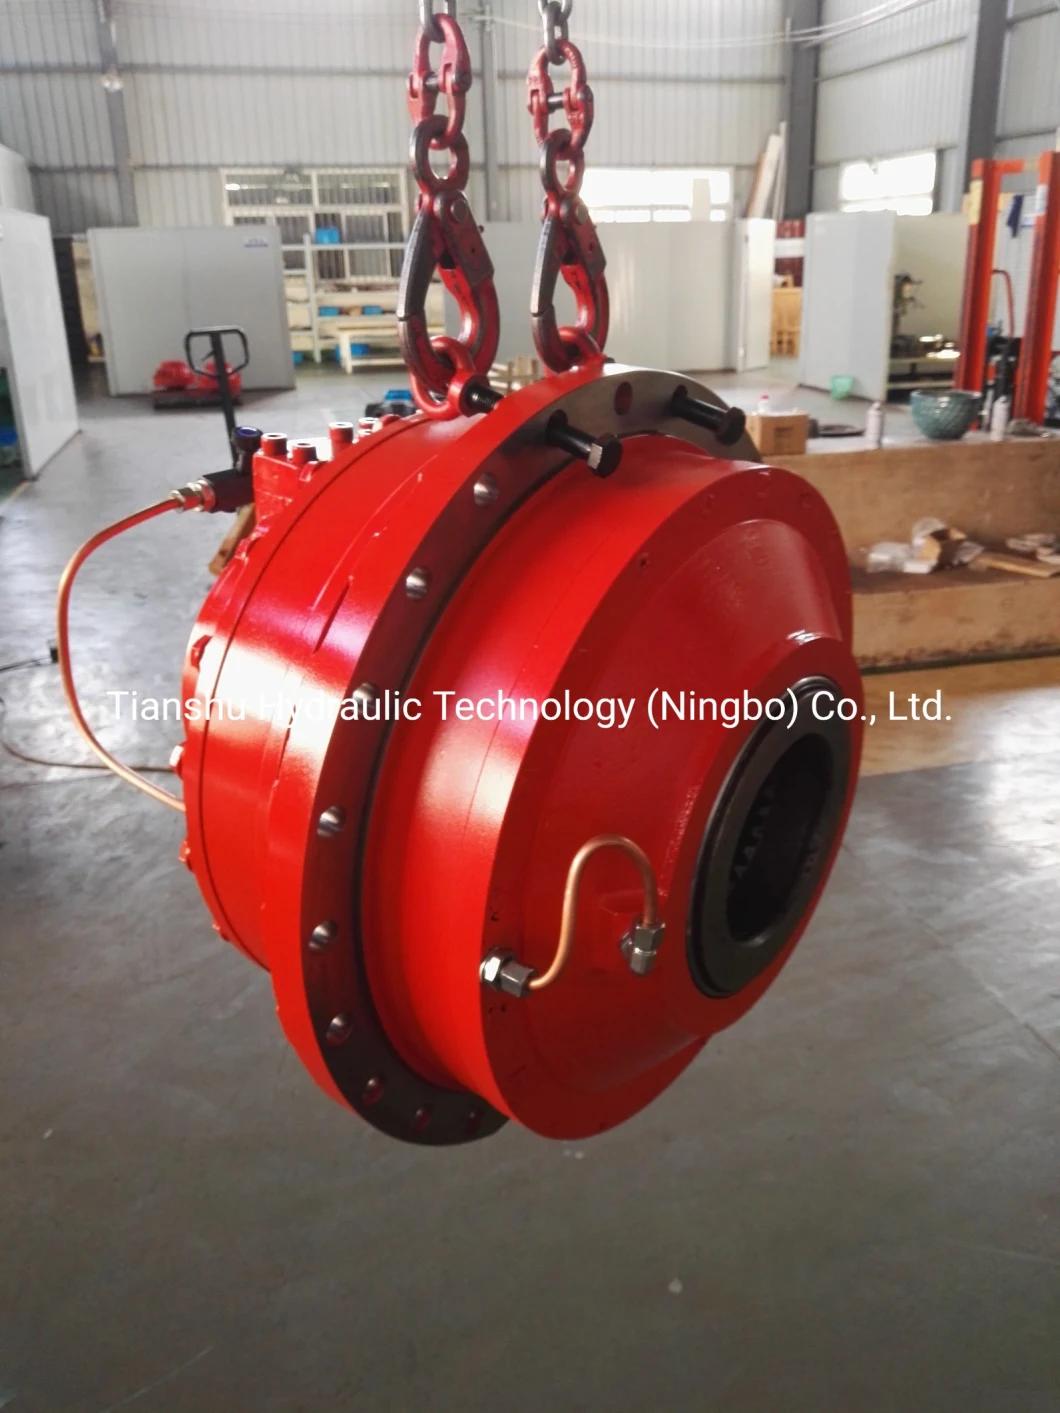 Motor Expert Rexroth Hagglunds Low Speed High Torque Ca Series Hydraulic Motor Pump with Brake for Coal Mining Machinery.